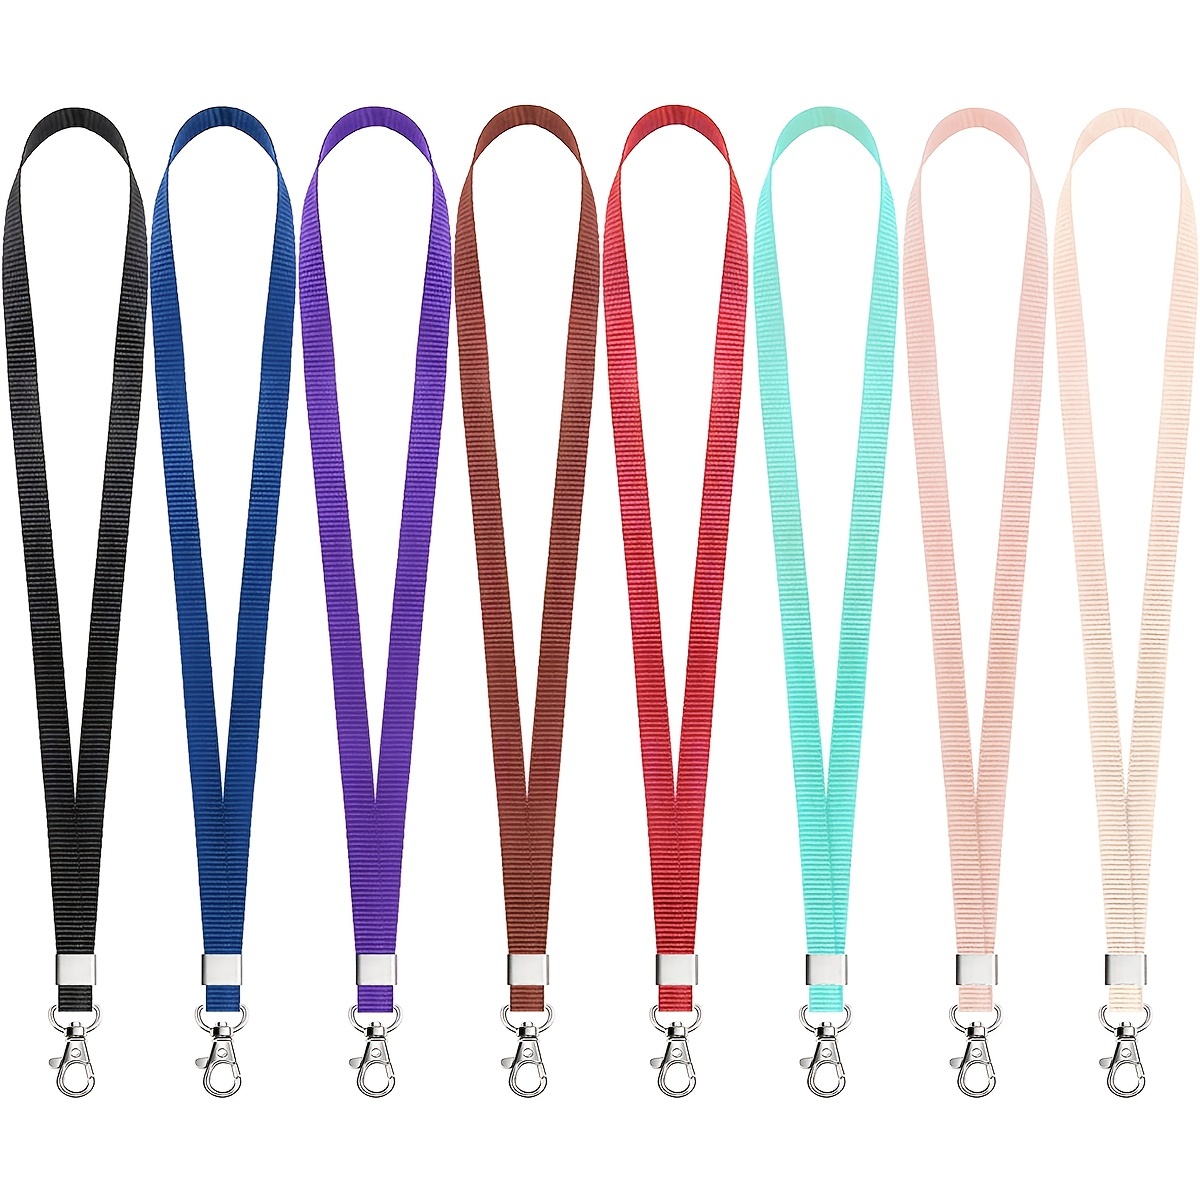 50 Pack ID Badge Holder Lanyards with Waterproof ID Card Holder Bulk Lanyard Name Badge Holder ID Lanyard Name Tag Holder, Size: 2 x 3